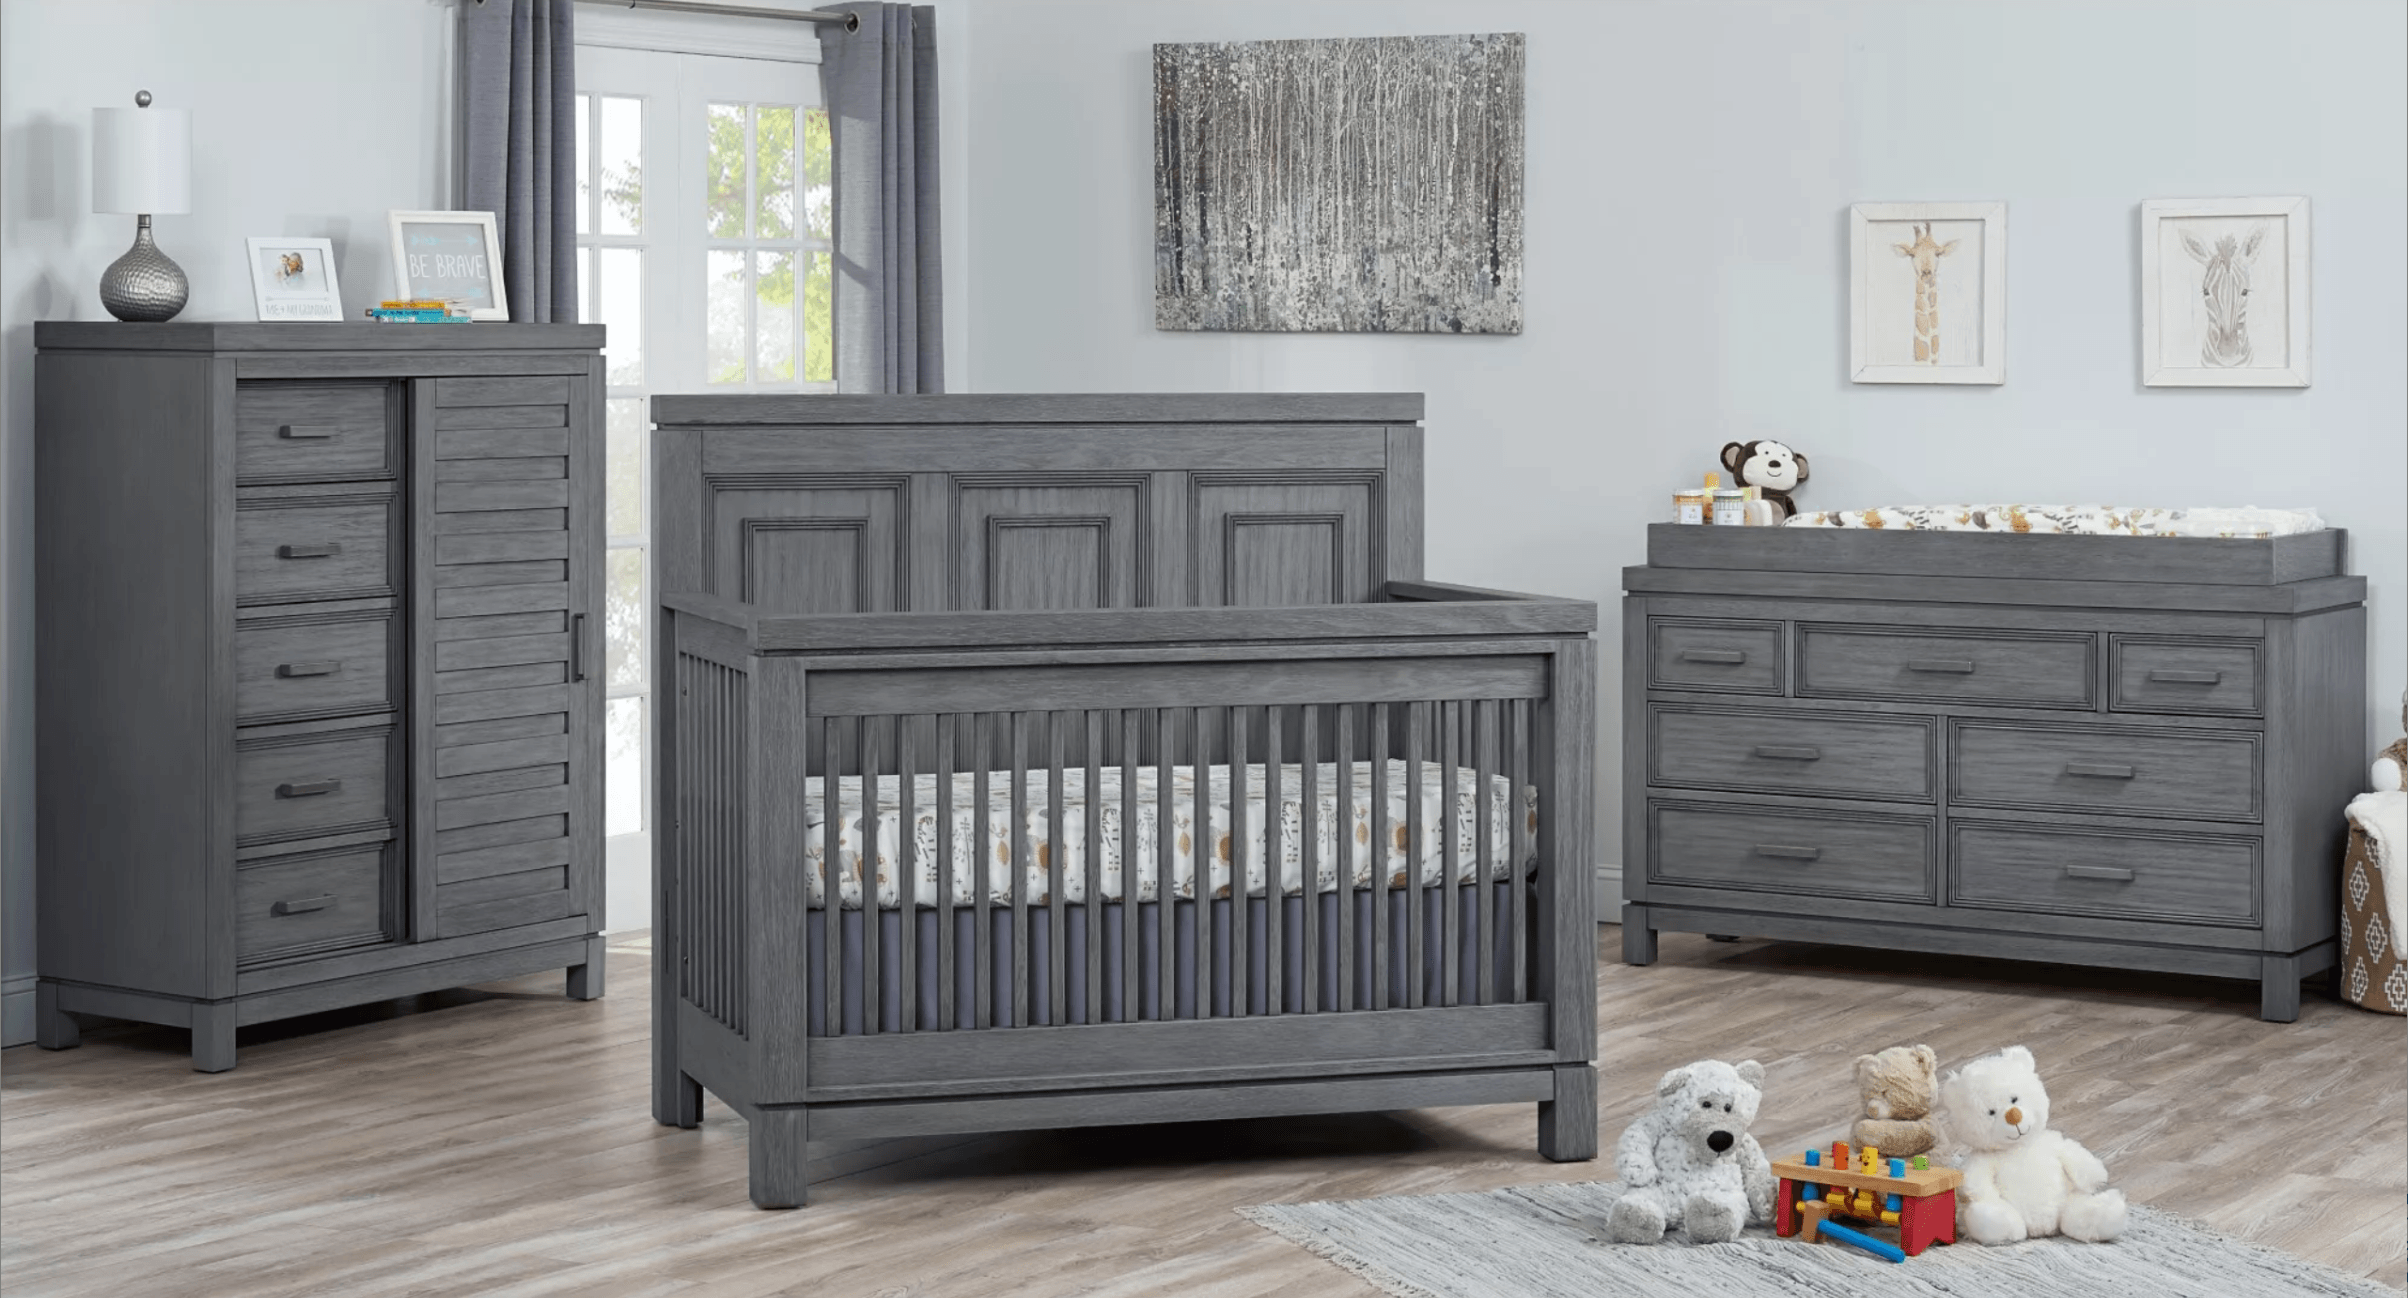 Manchester Nursery Furniture Collection - The Baby's Room